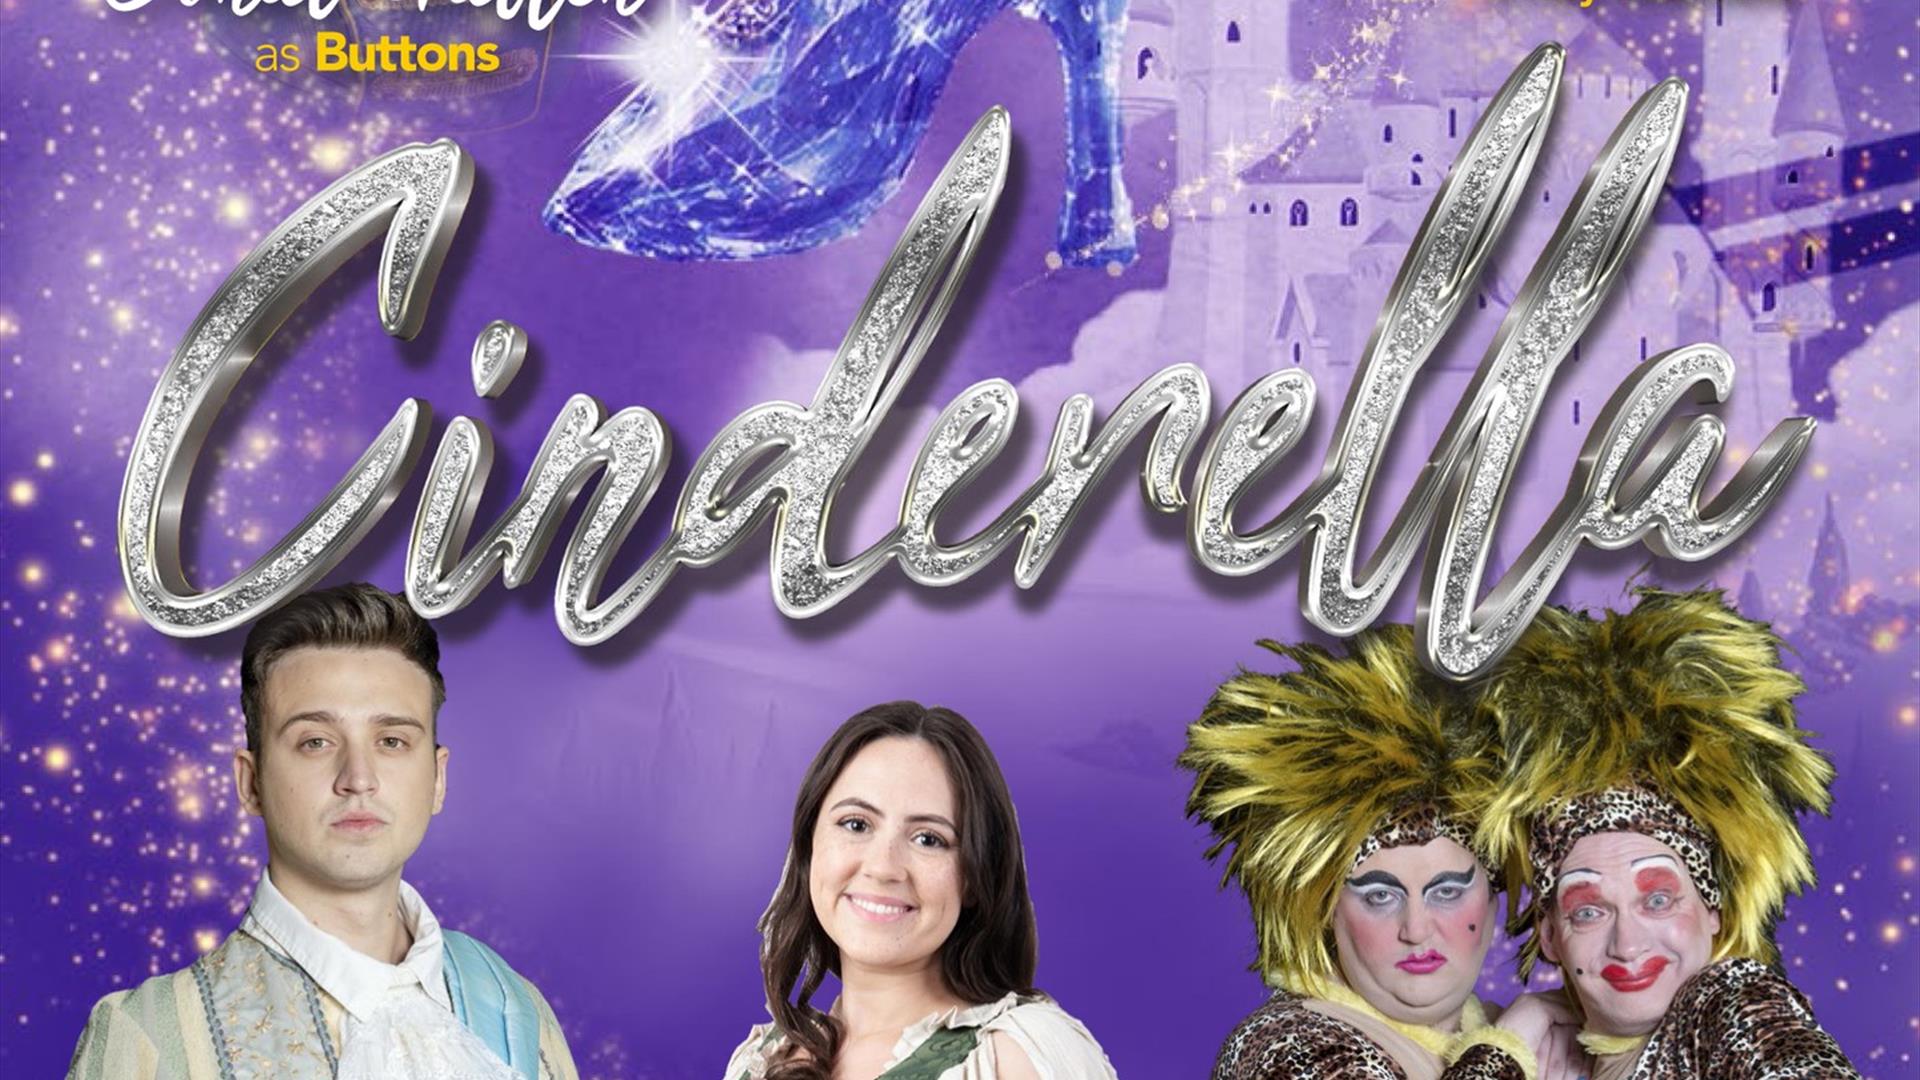 Poster advertising 2022 Panto - Cinderella which is running from 1st December until 2nd January